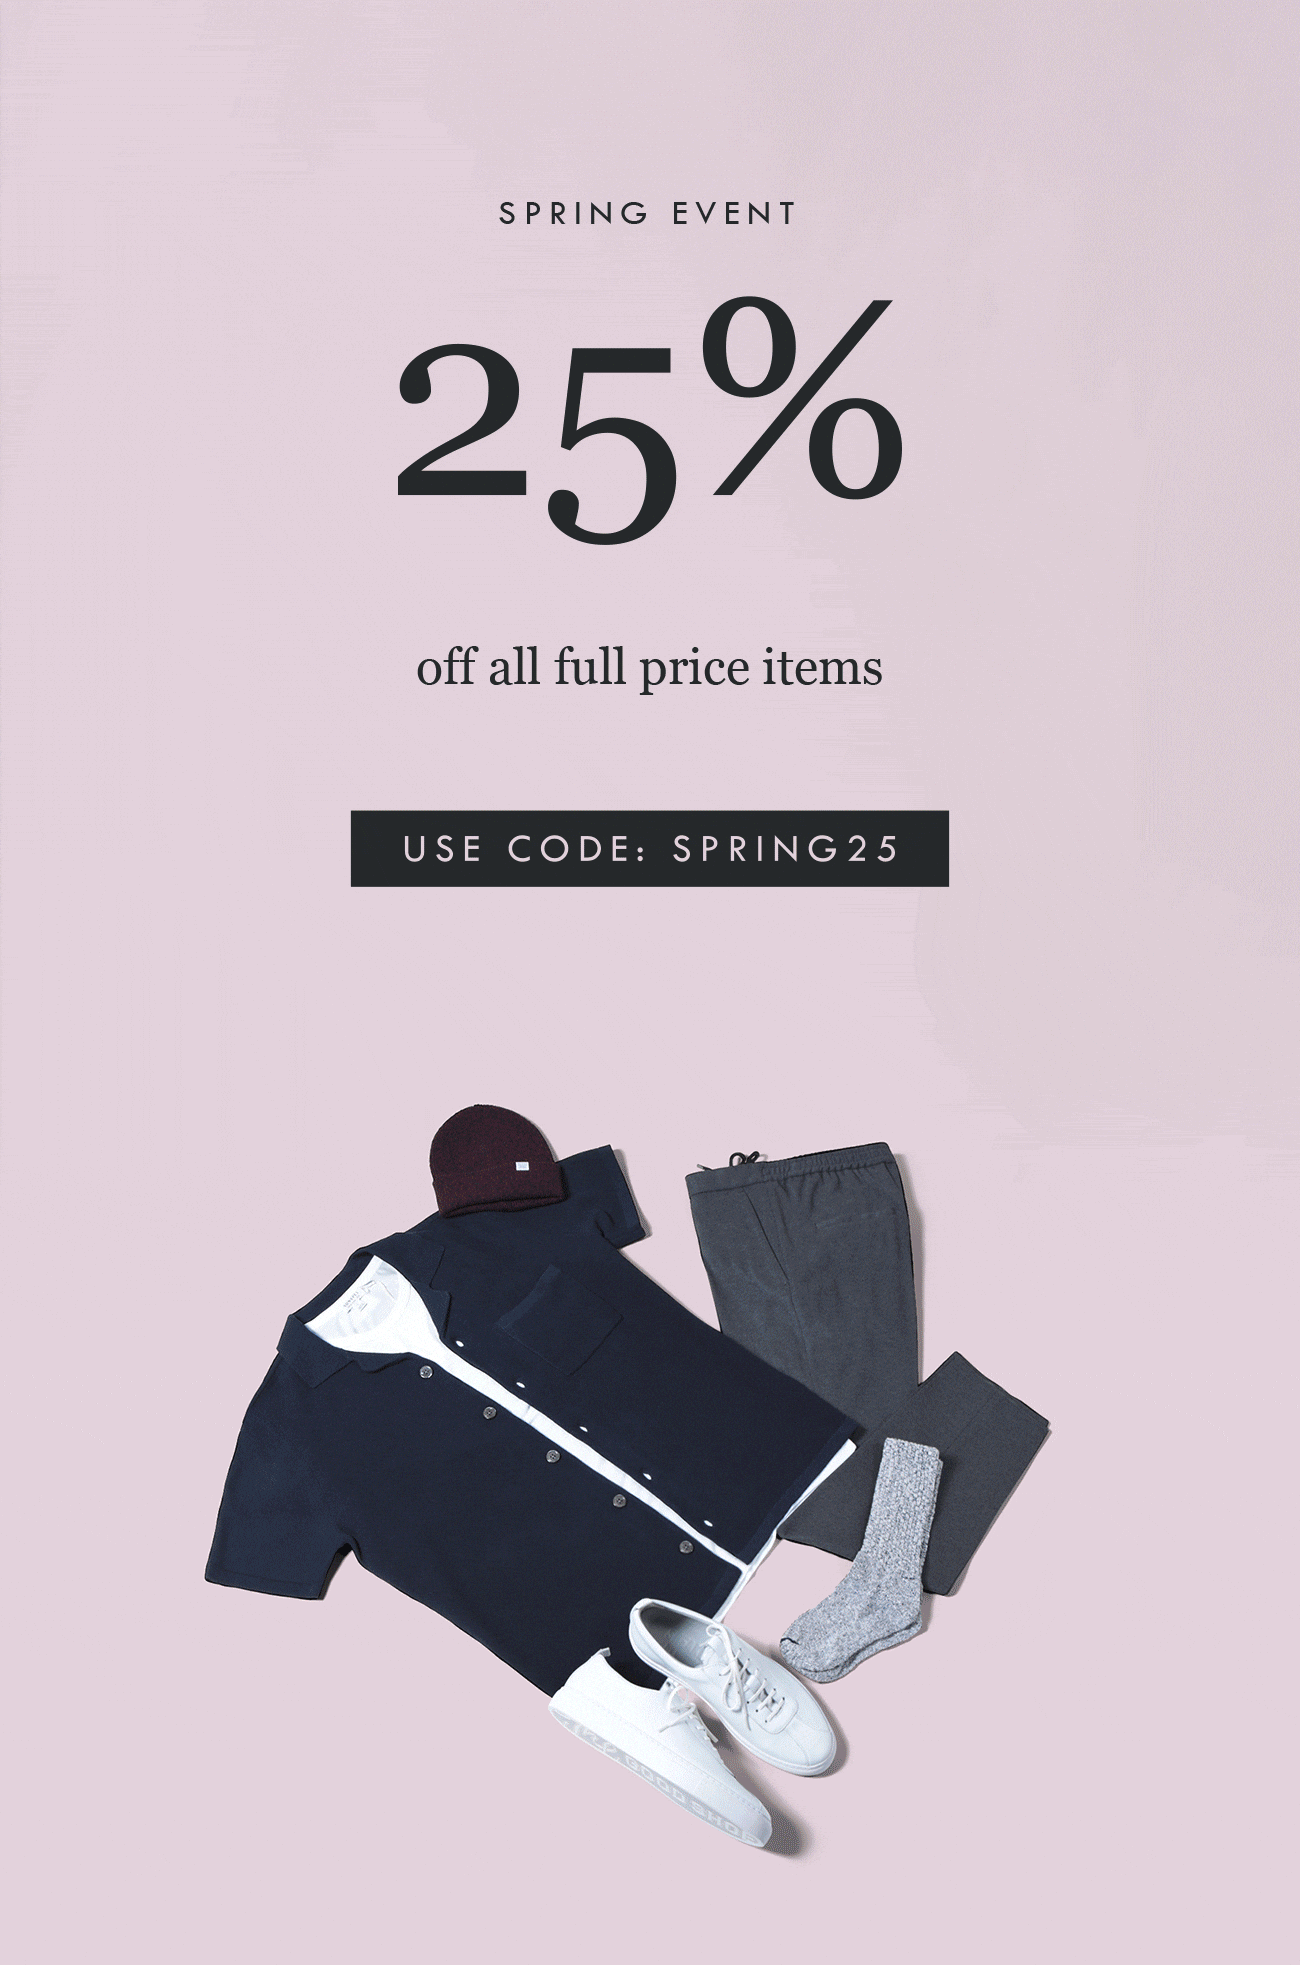 SPRING EVENT
25% off all full price items
USE CODE:SPRING19